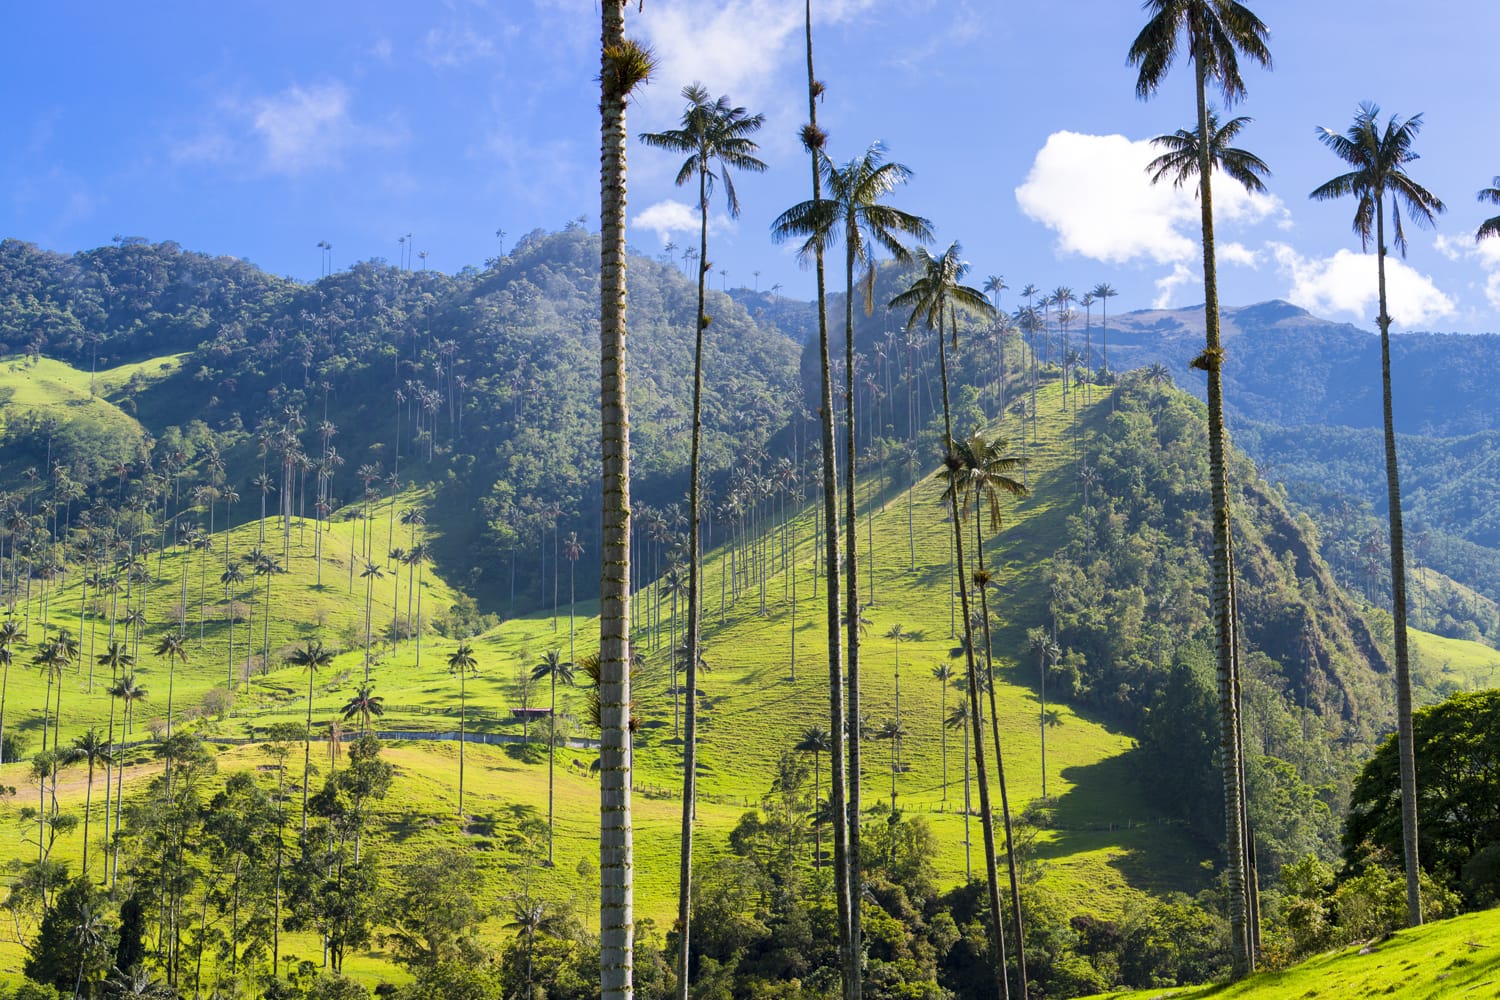 Cocora valley in Colombia